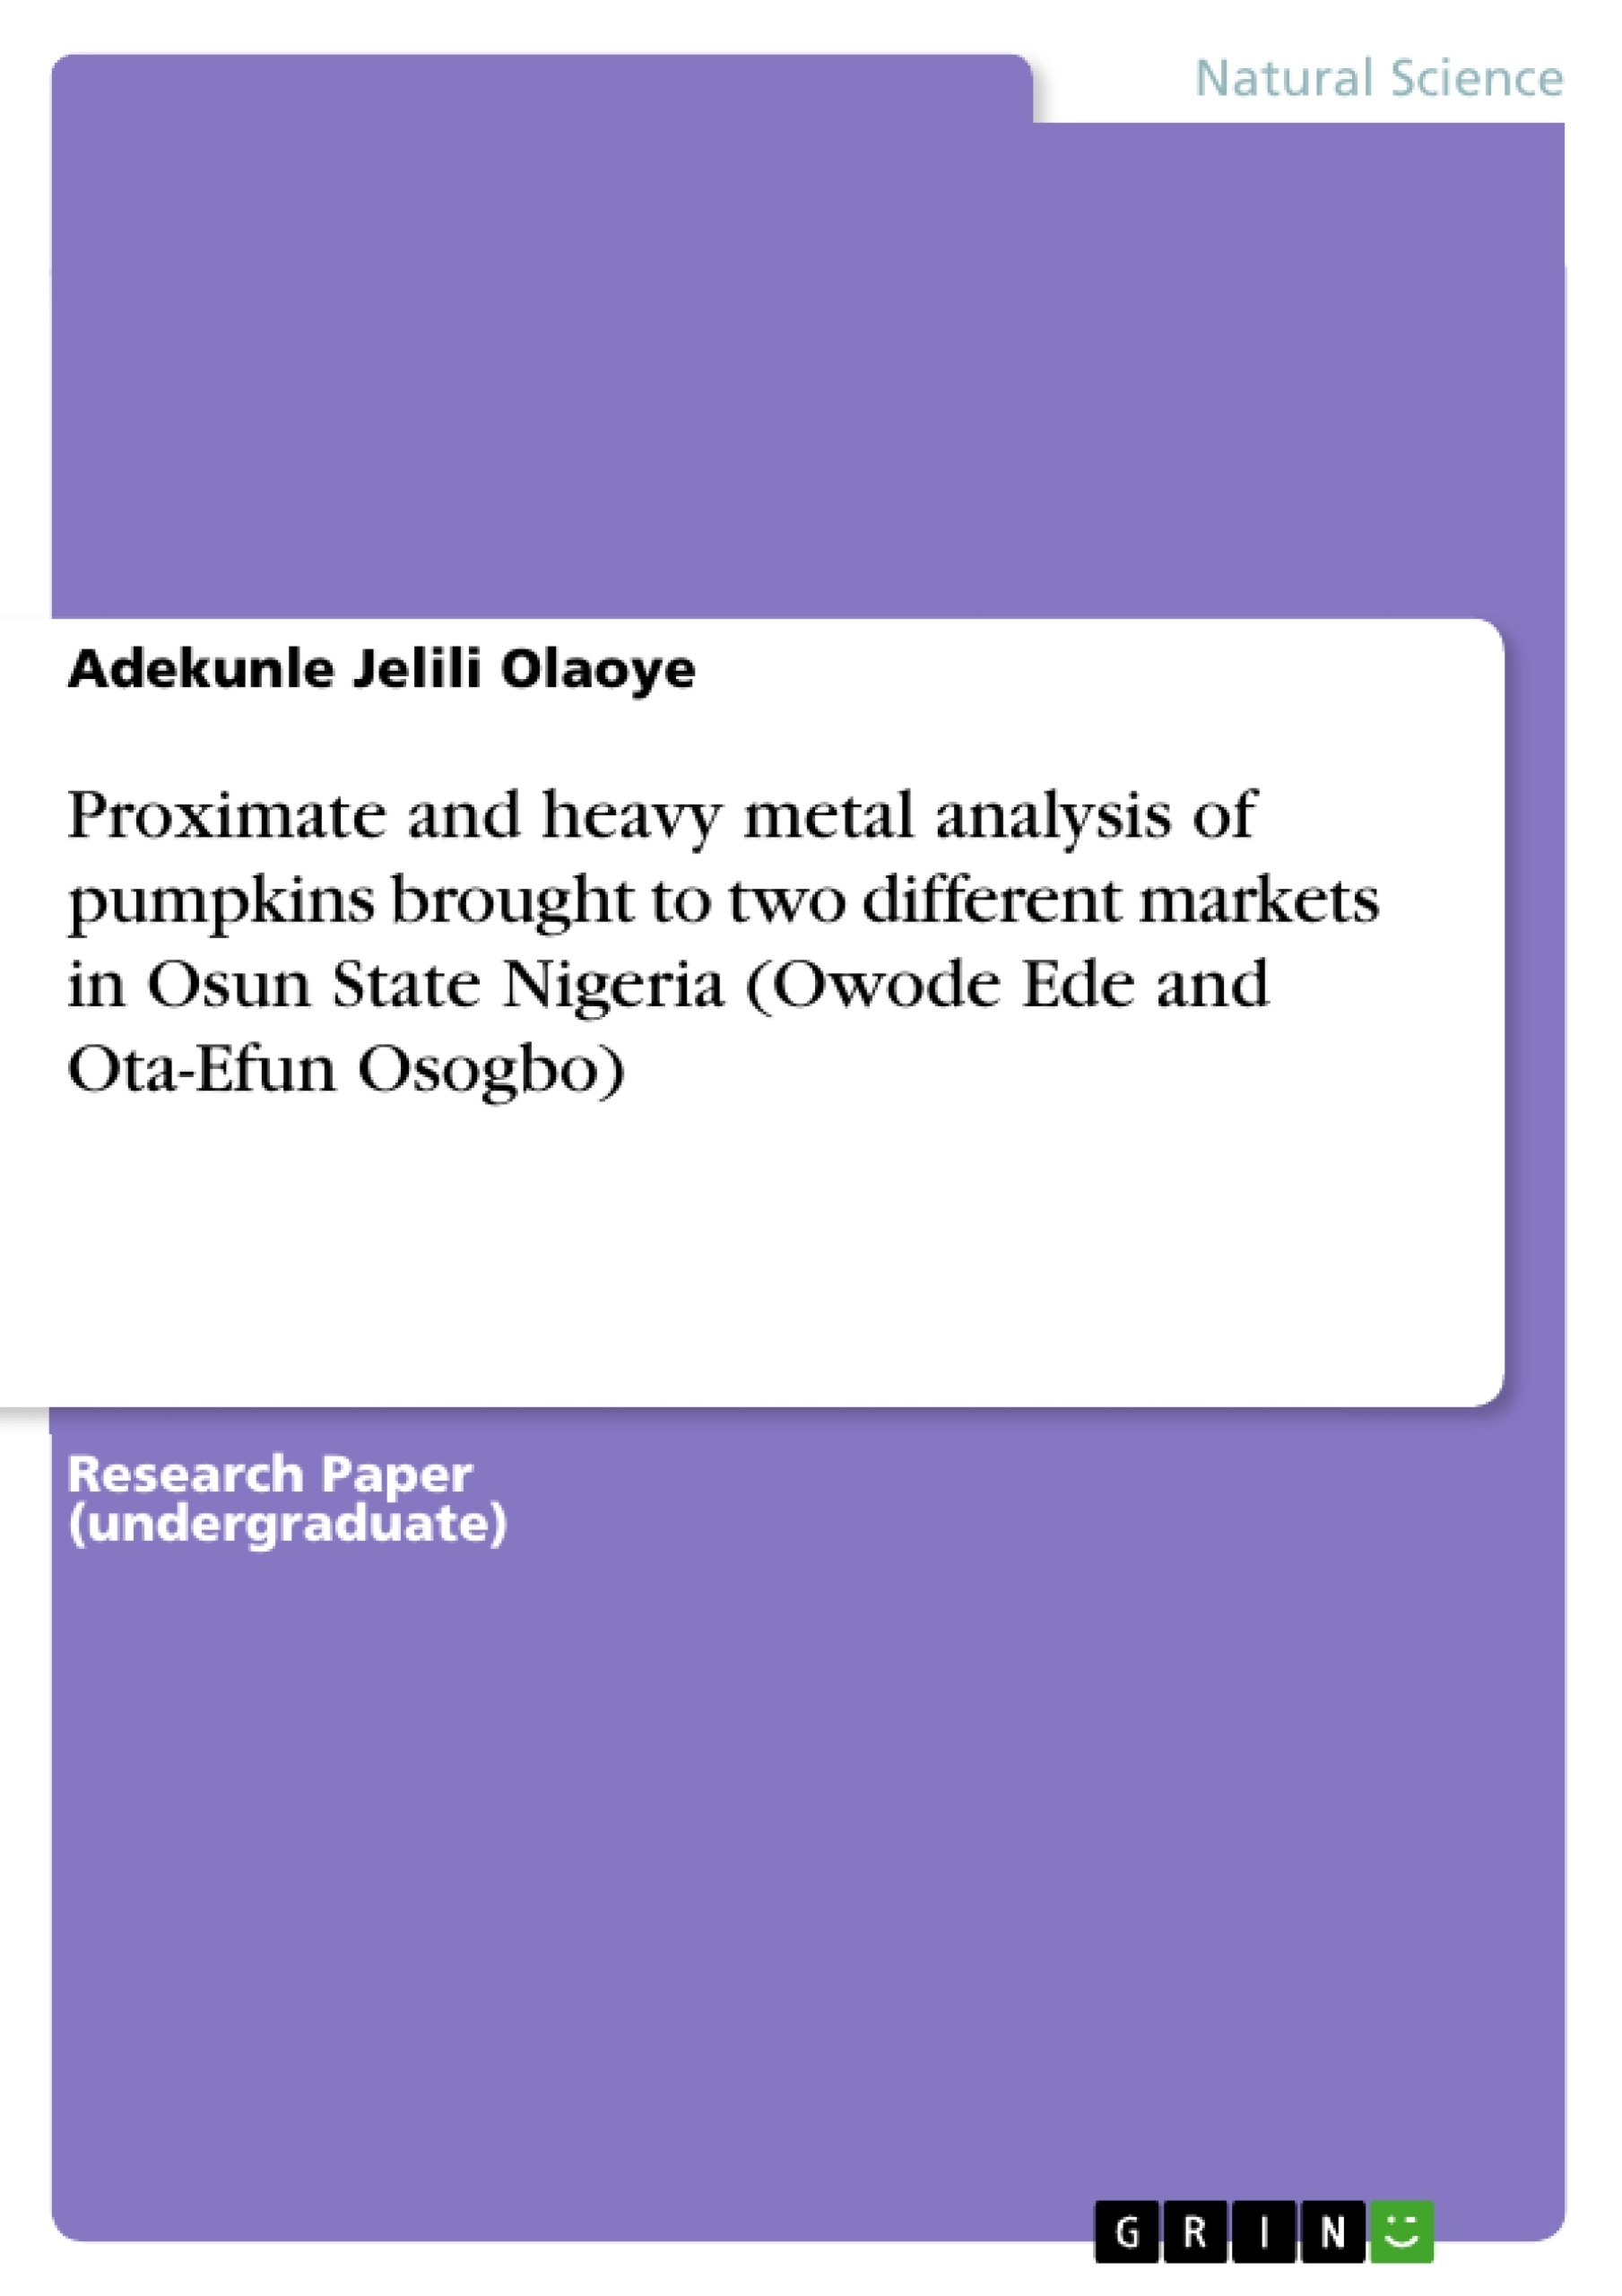 Título: Proximate and heavy metal analysis of pumpkins brought to two different markets in Osun State Nigeria (Owode Ede and Ota-Efun Osogbo)